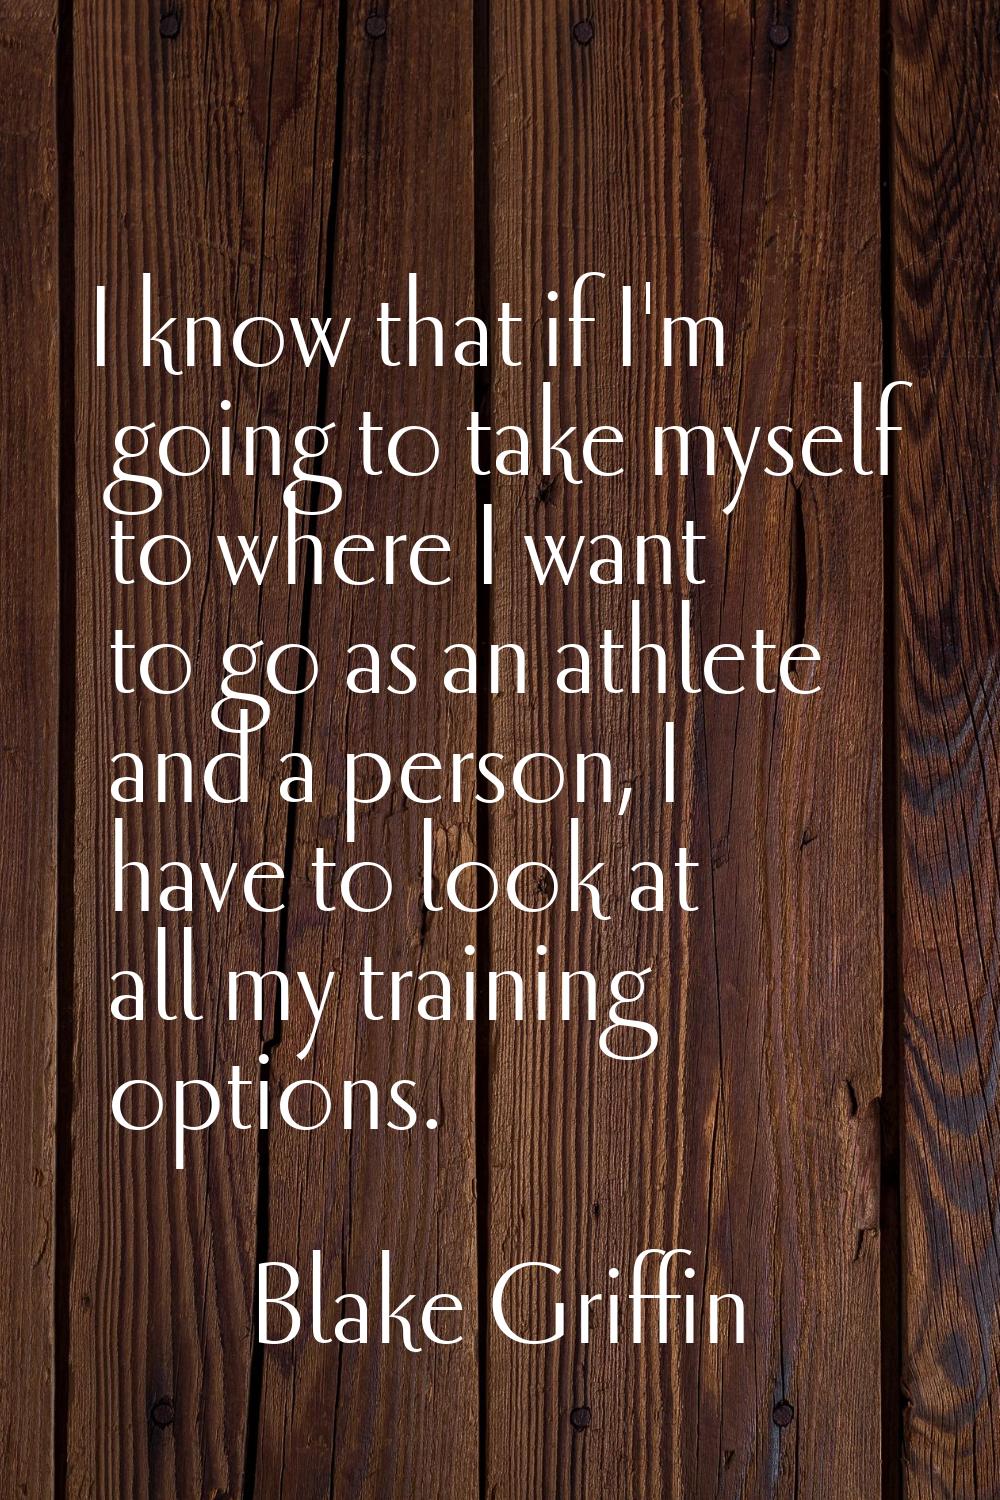 I know that if I'm going to take myself to where I want to go as an athlete and a person, I have to